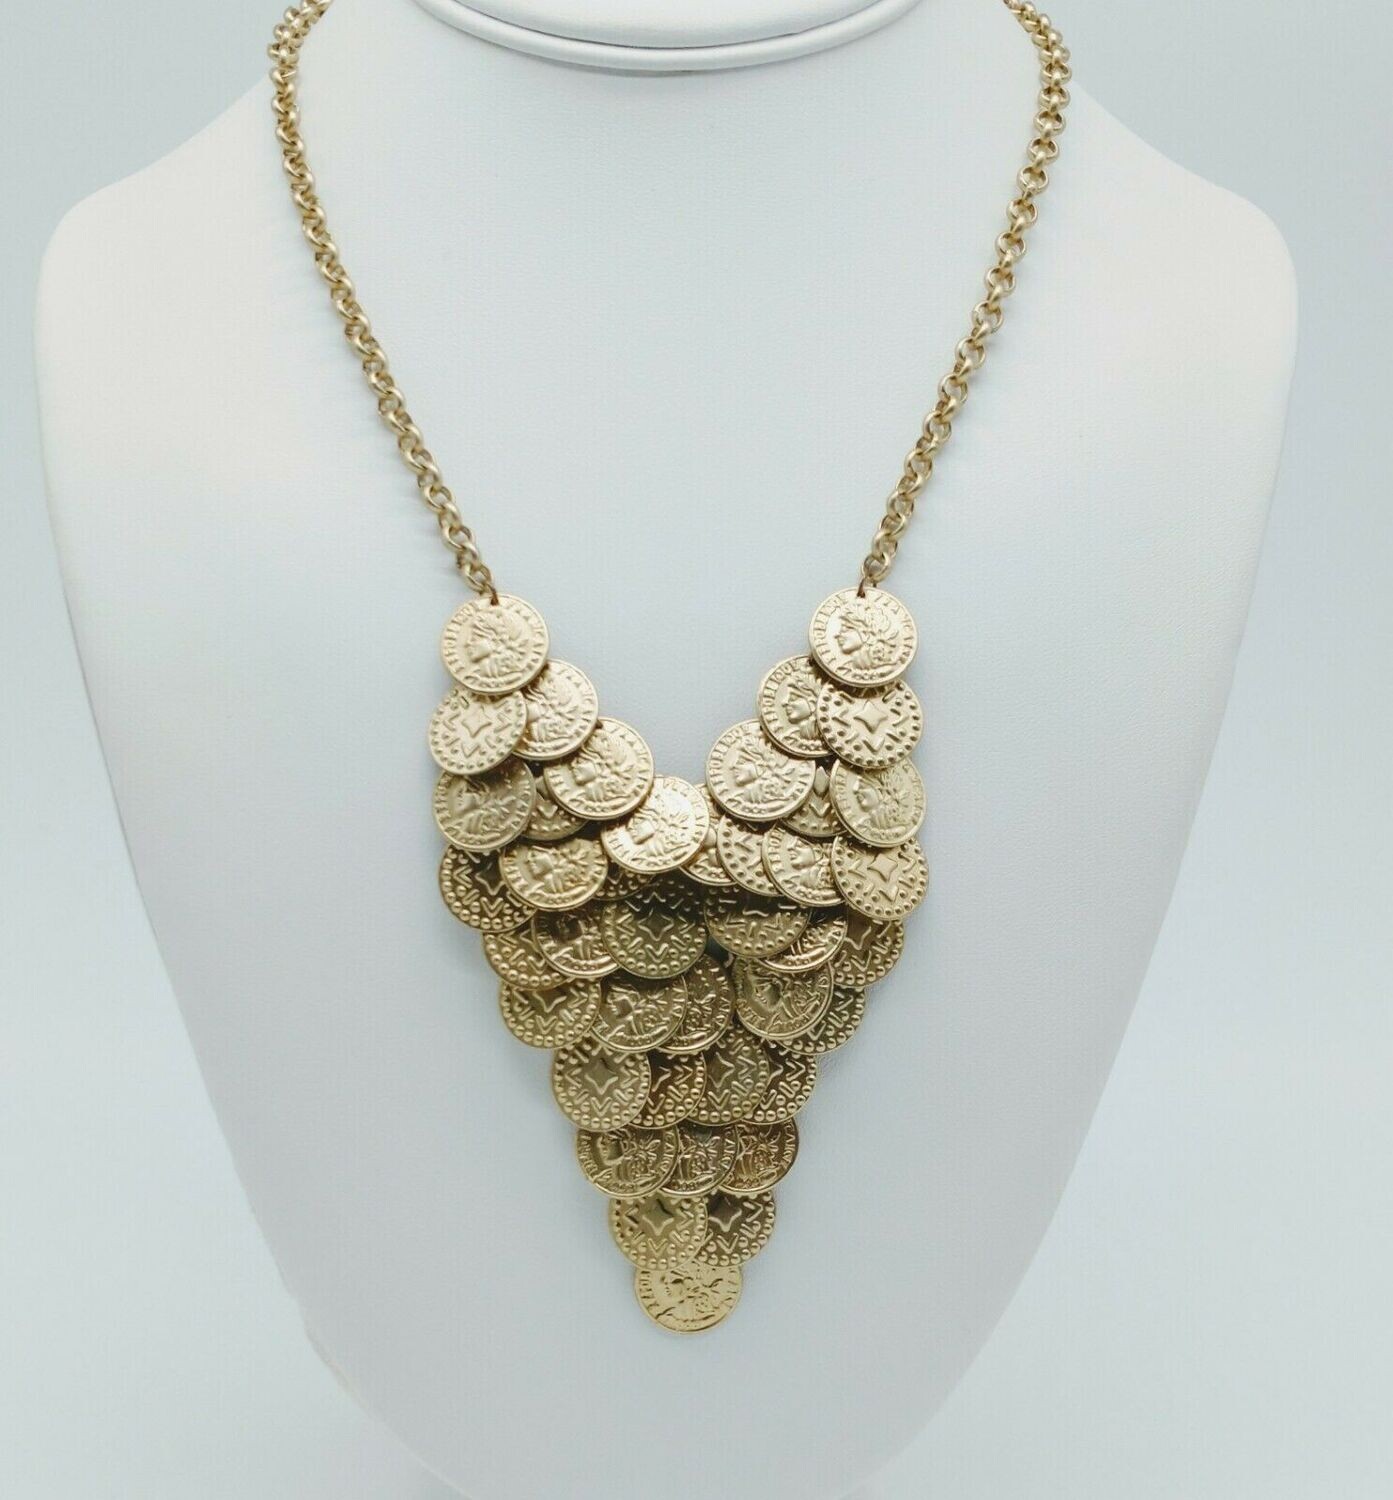 MATTE GOLD TONE V-SHAPED LAYERED COIN BIB NECKLACE